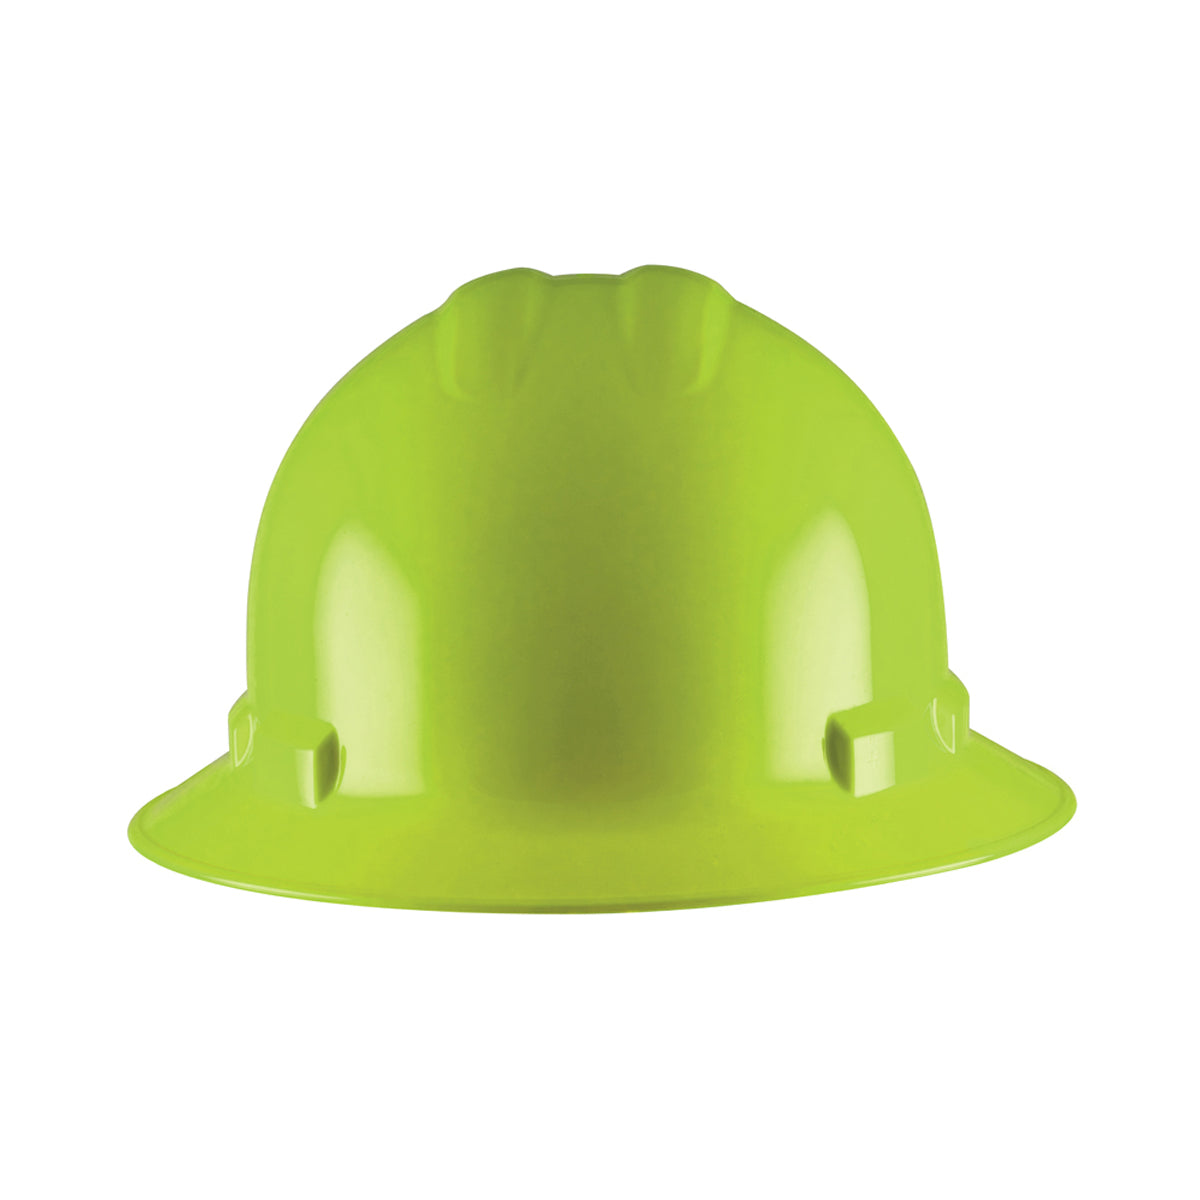 Full-Brim Style Hard Hat, 4-Point Ratchet Suspension, Class E and G, OSHA Approved Hard Hat